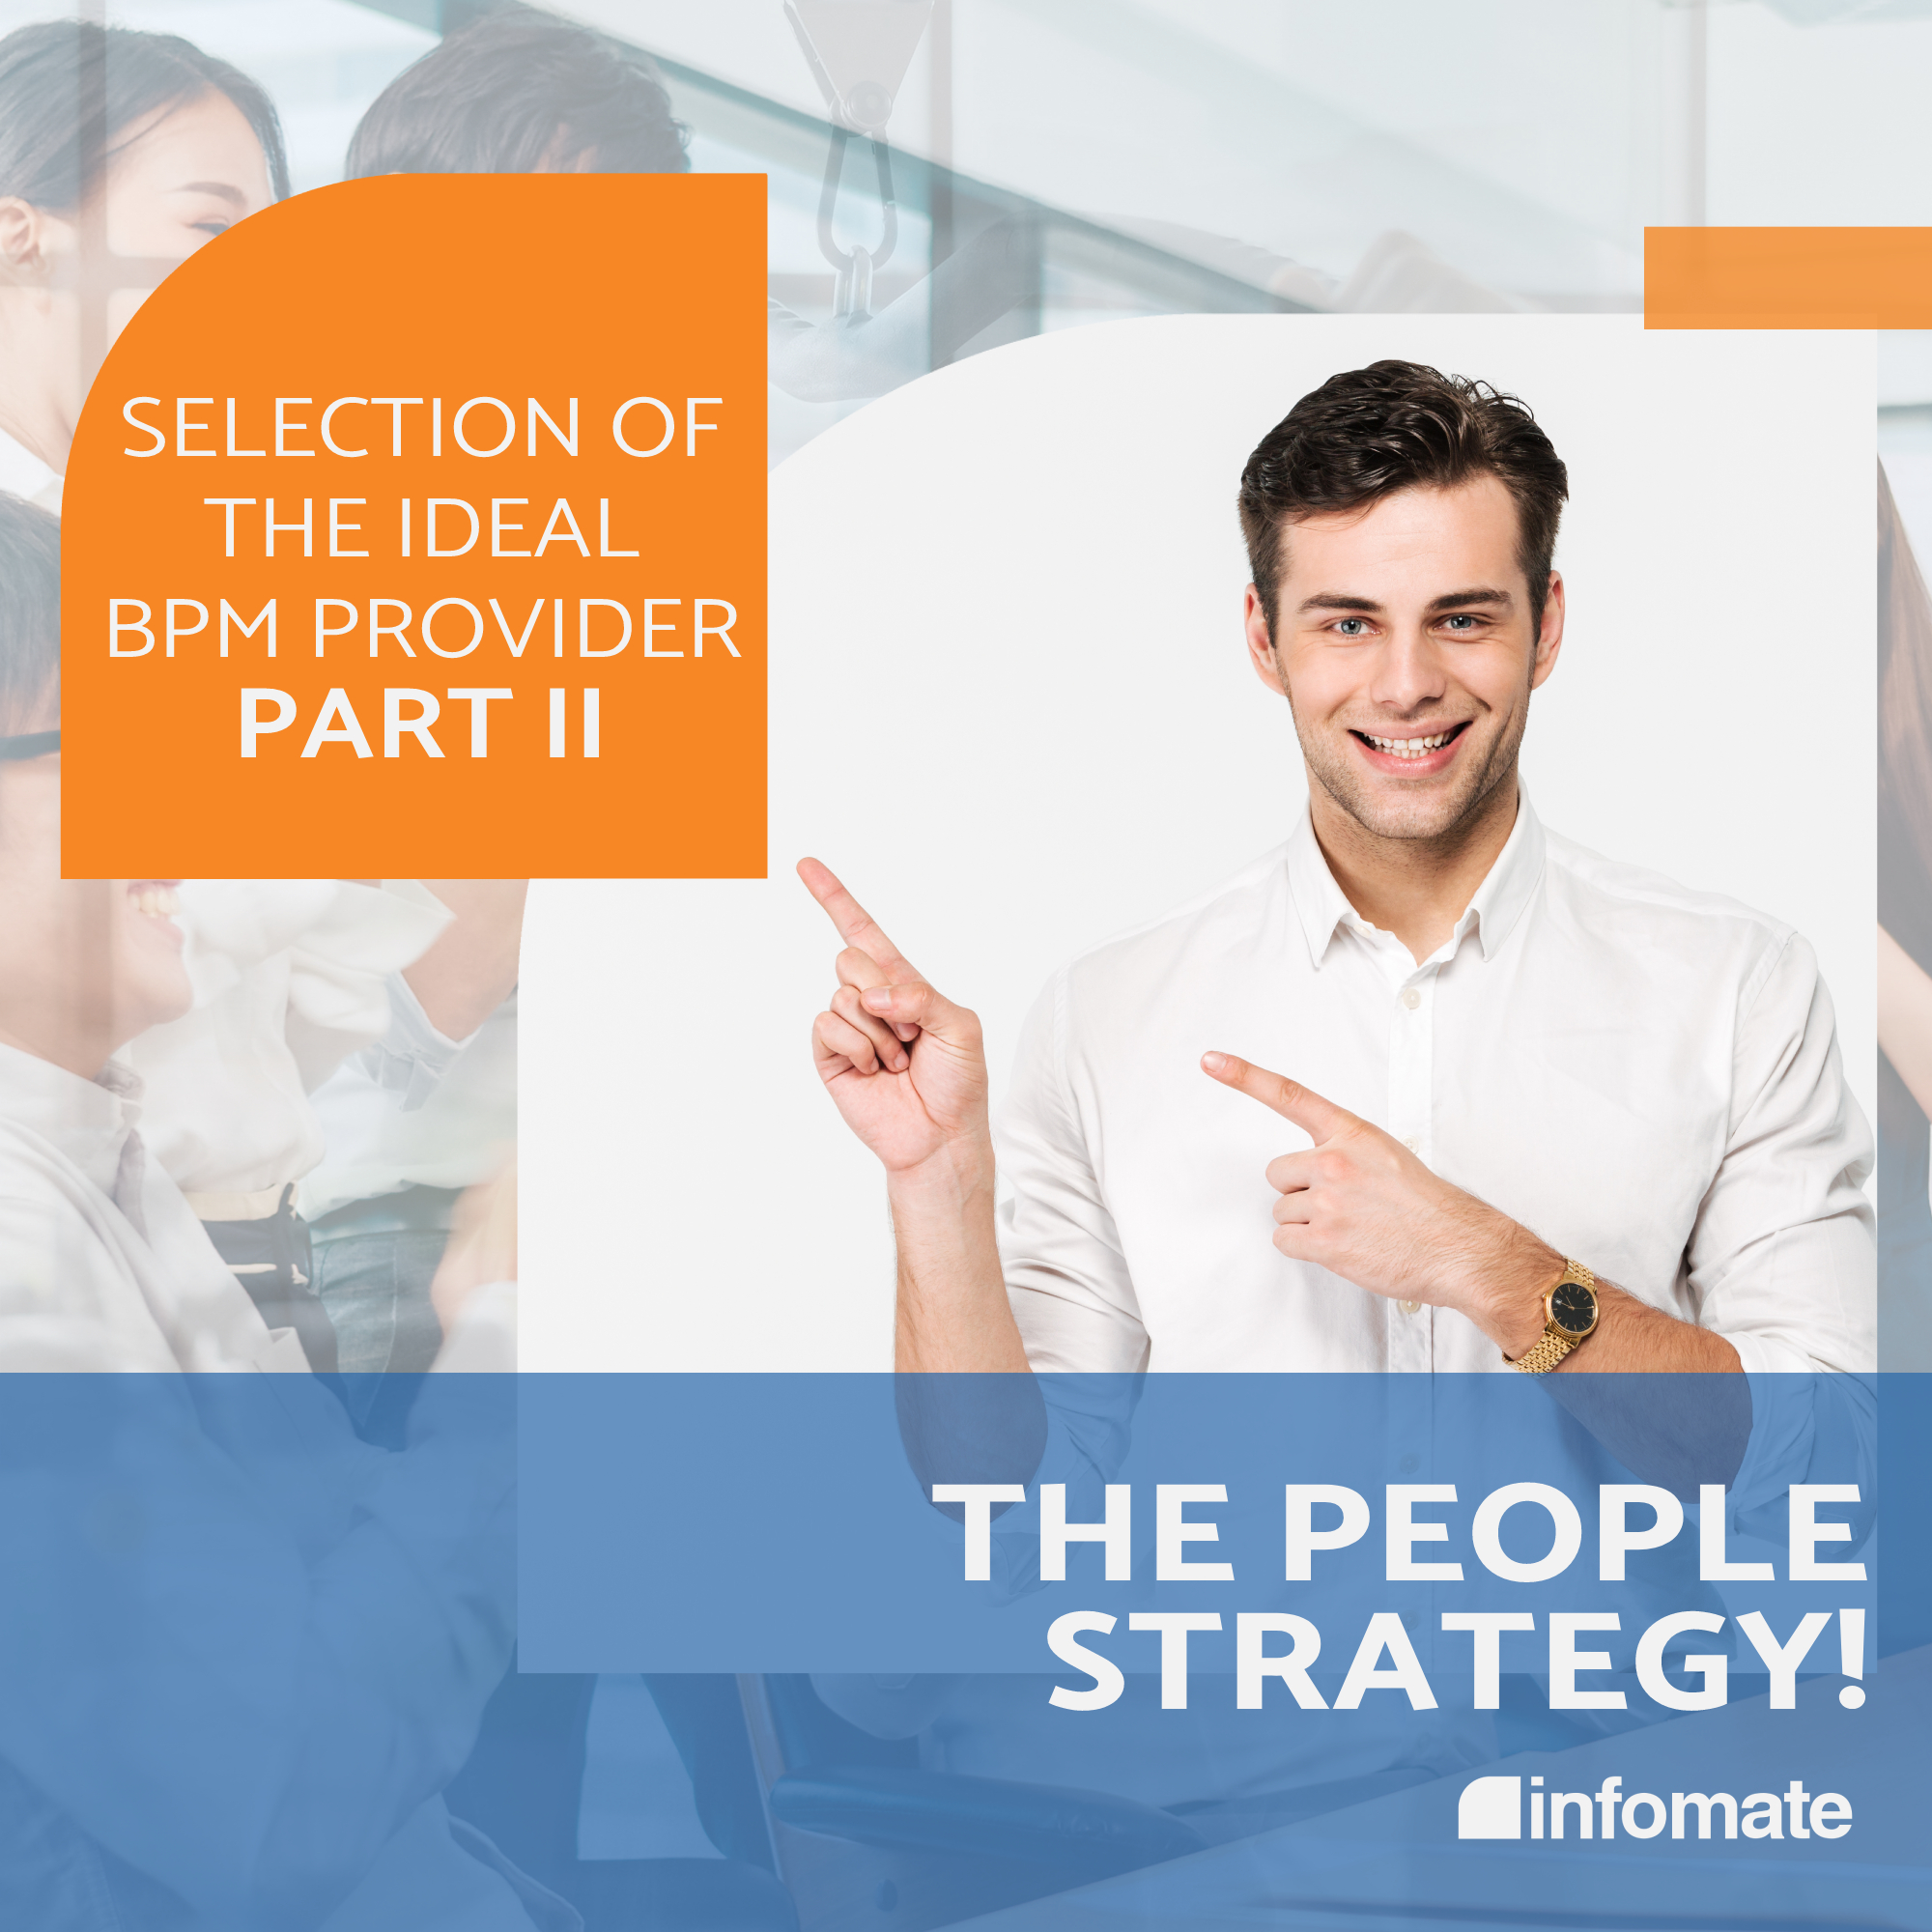 Selection of the ideal BPM provider Part II â€“ the people strategy!